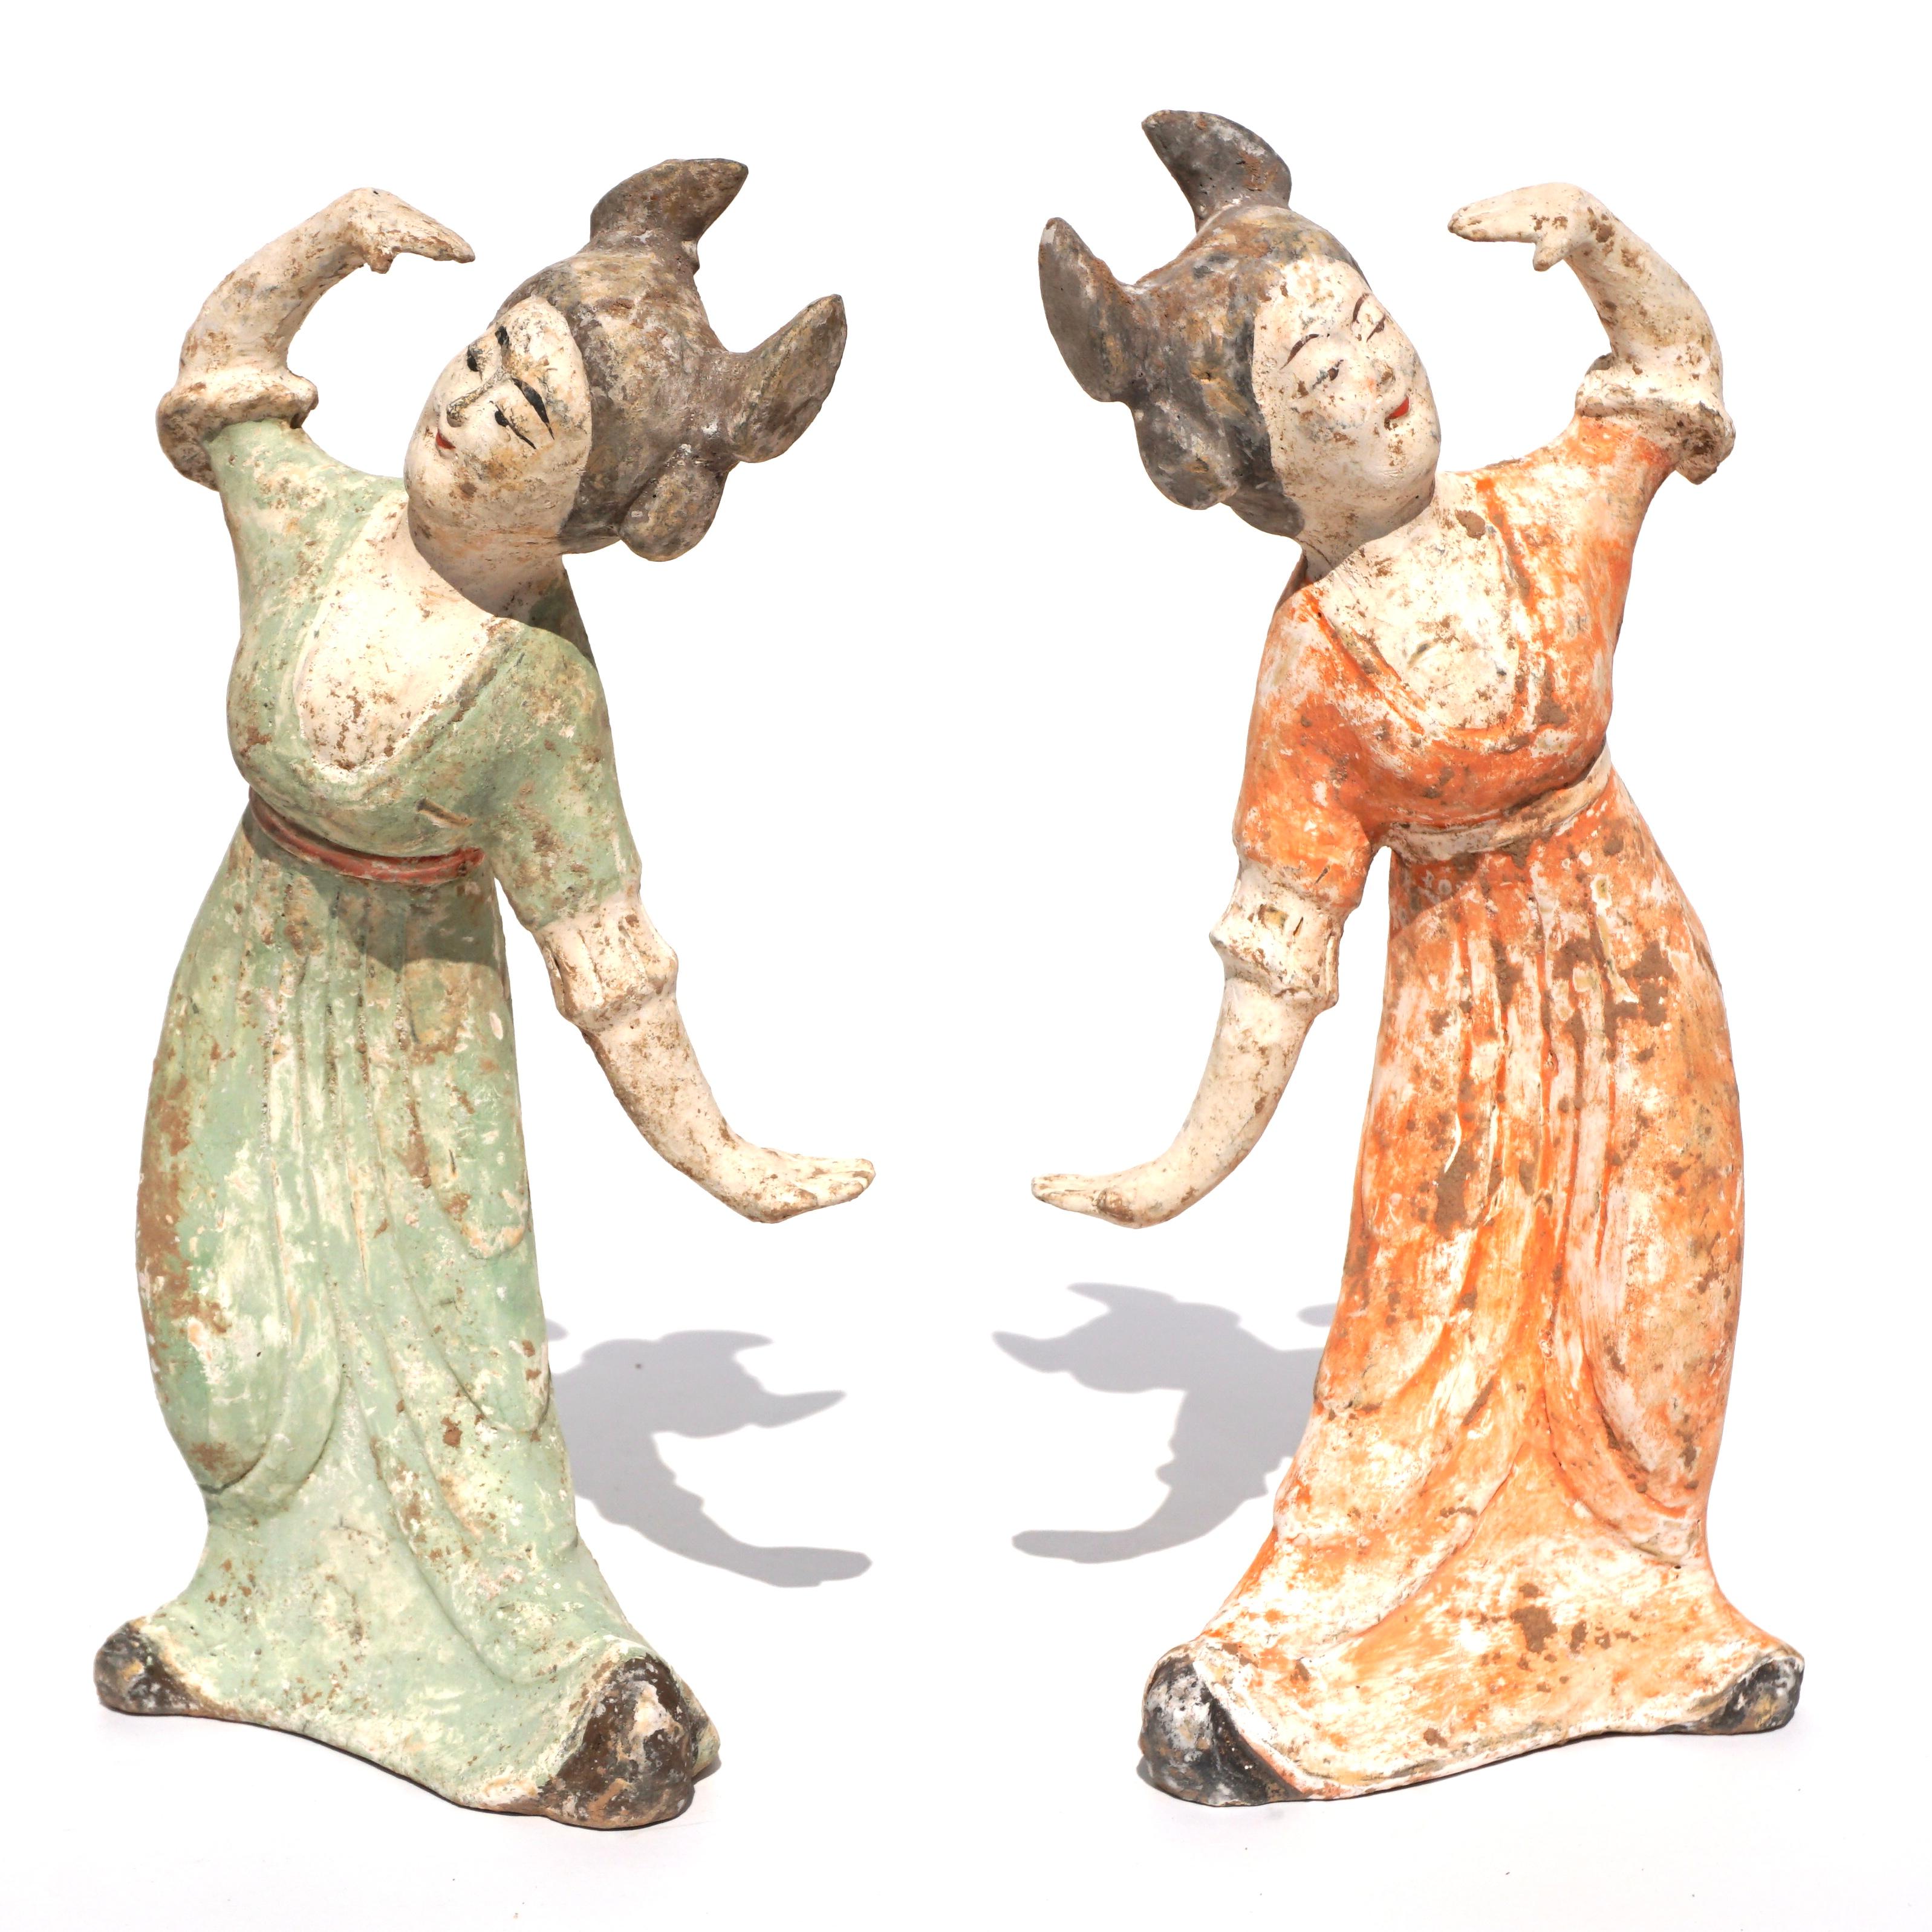 C. AD 618 and 907. Tang Dynasty. 

A delicate Tang Dynasty pair of female dancer figures. Both wearing long flowing gowns with the hands uncovered. One dress is a deep orange, whilst the waist sash which separates the skirt from the bodice is of